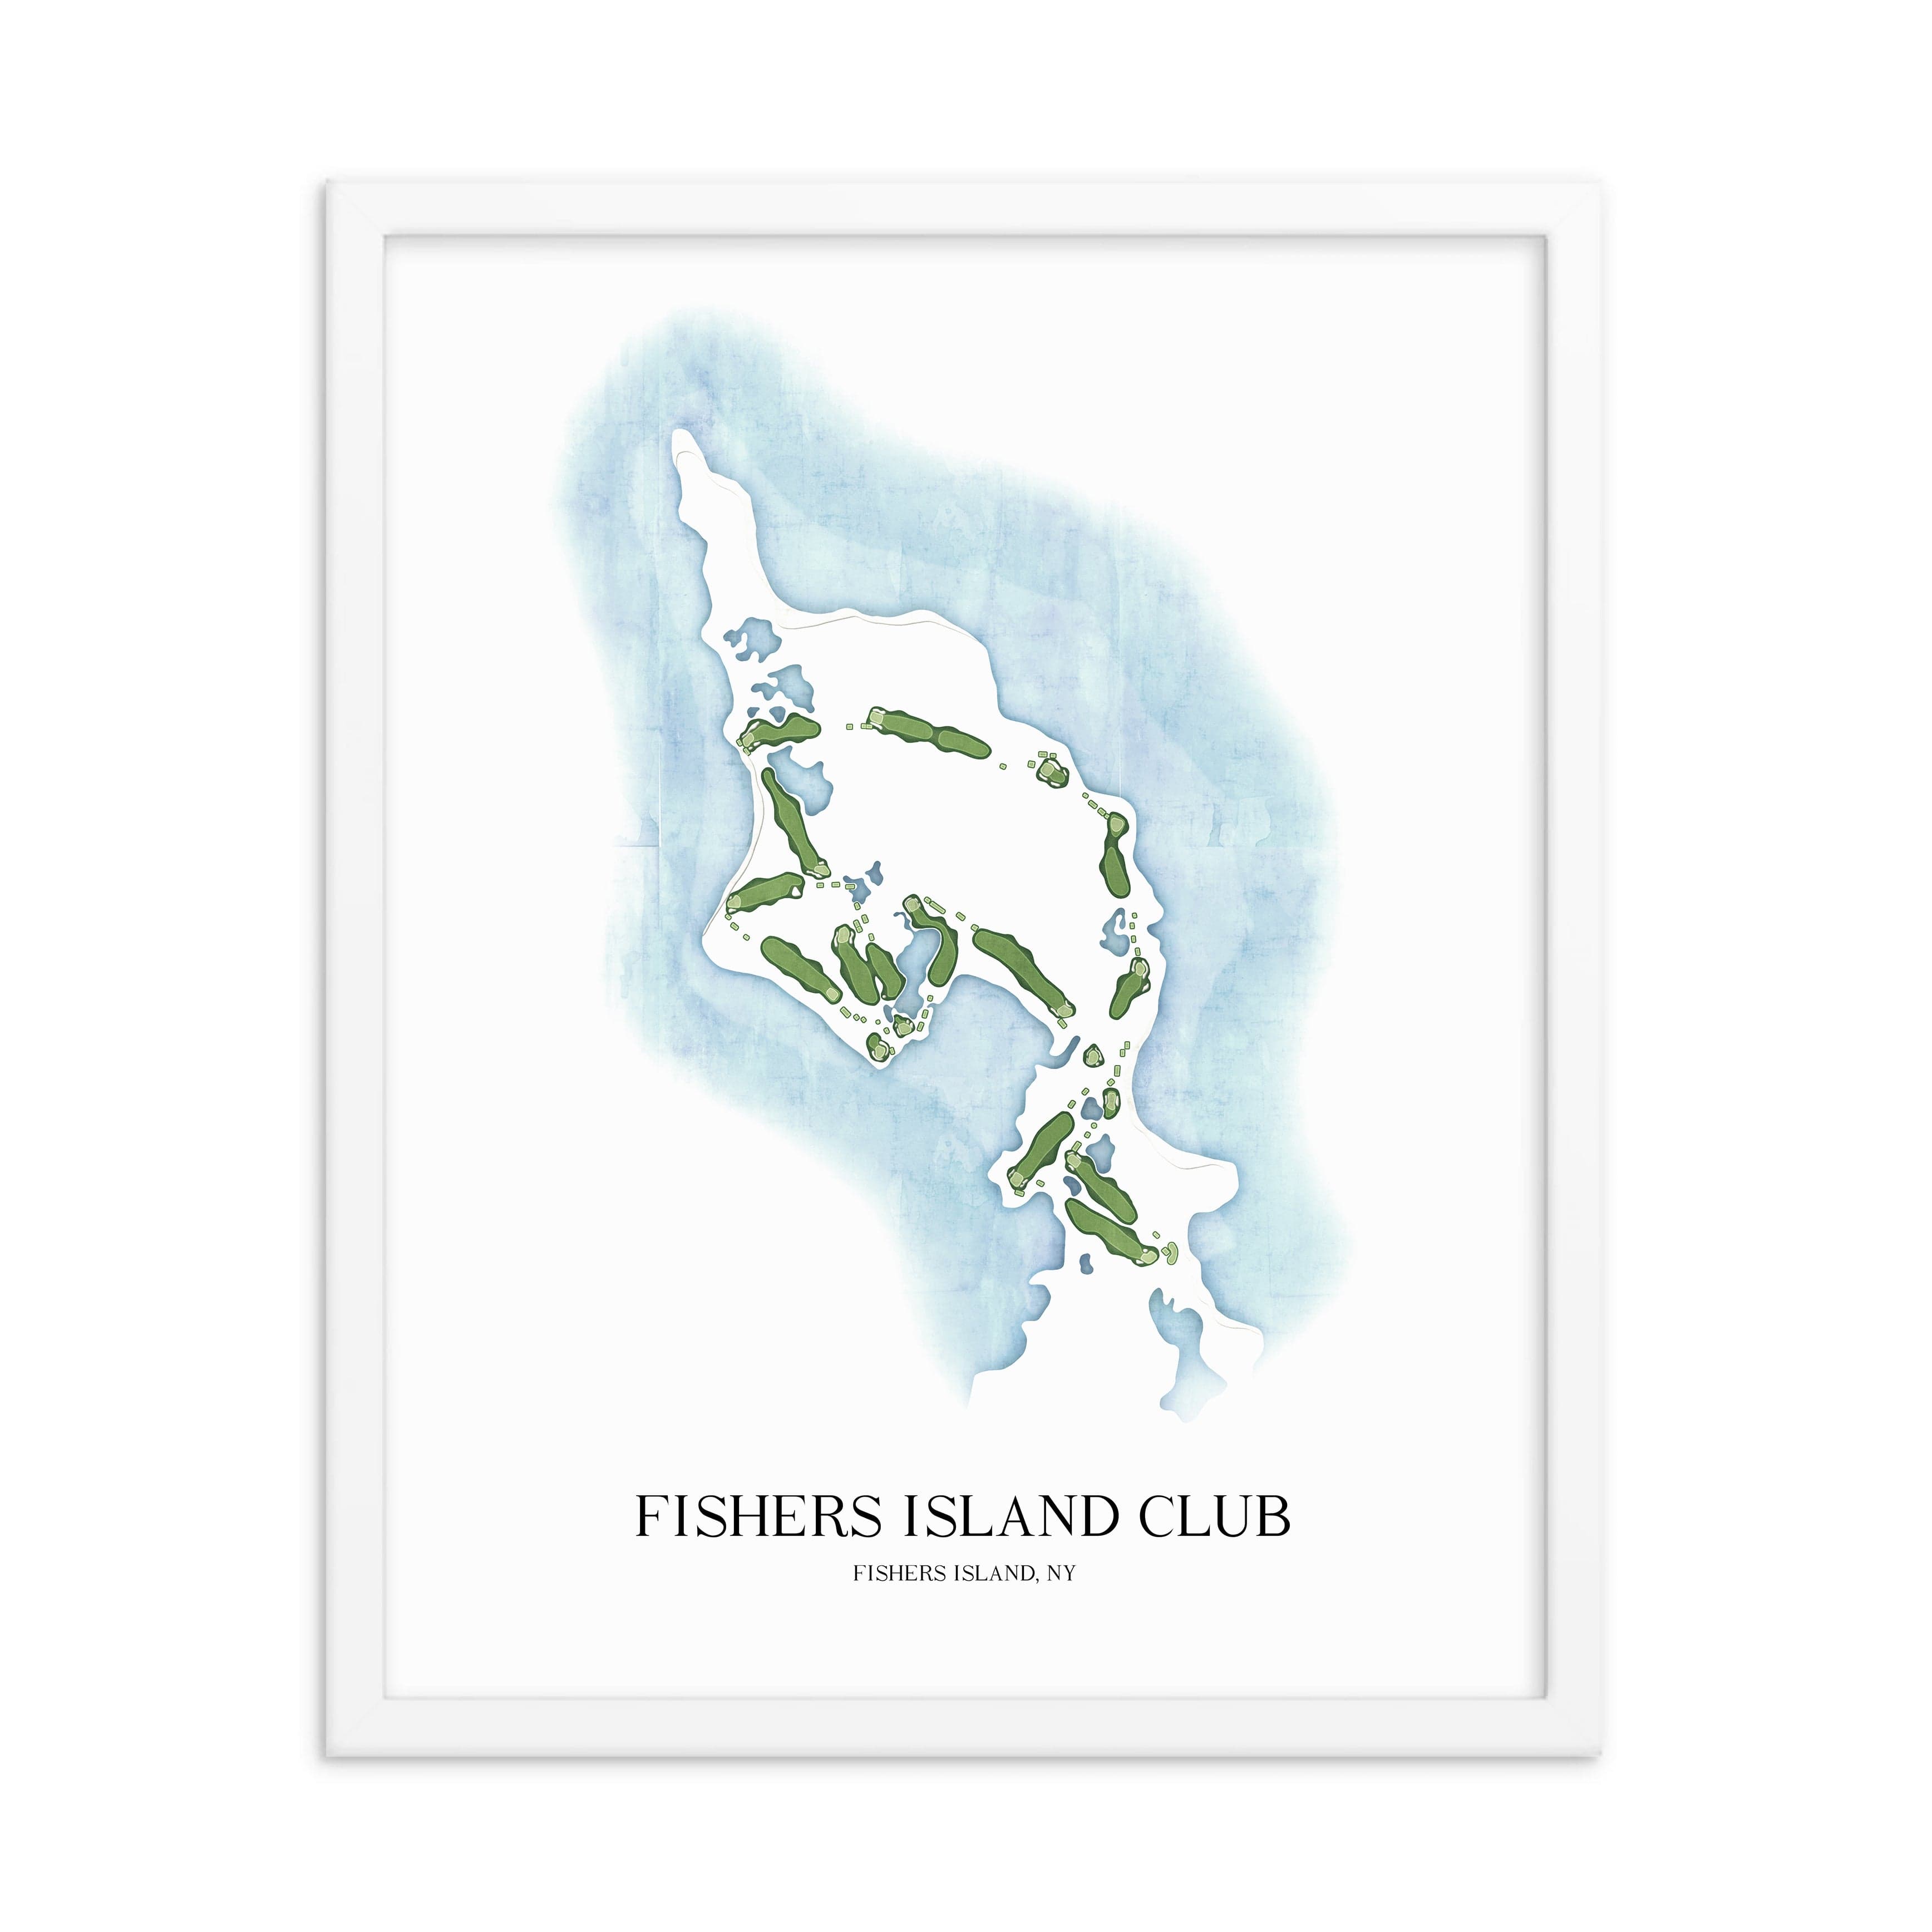 The 19th Hole Golf Shop - Golf Course Prints -  8" x 10" / White Fishers Island Club Golf Course Map